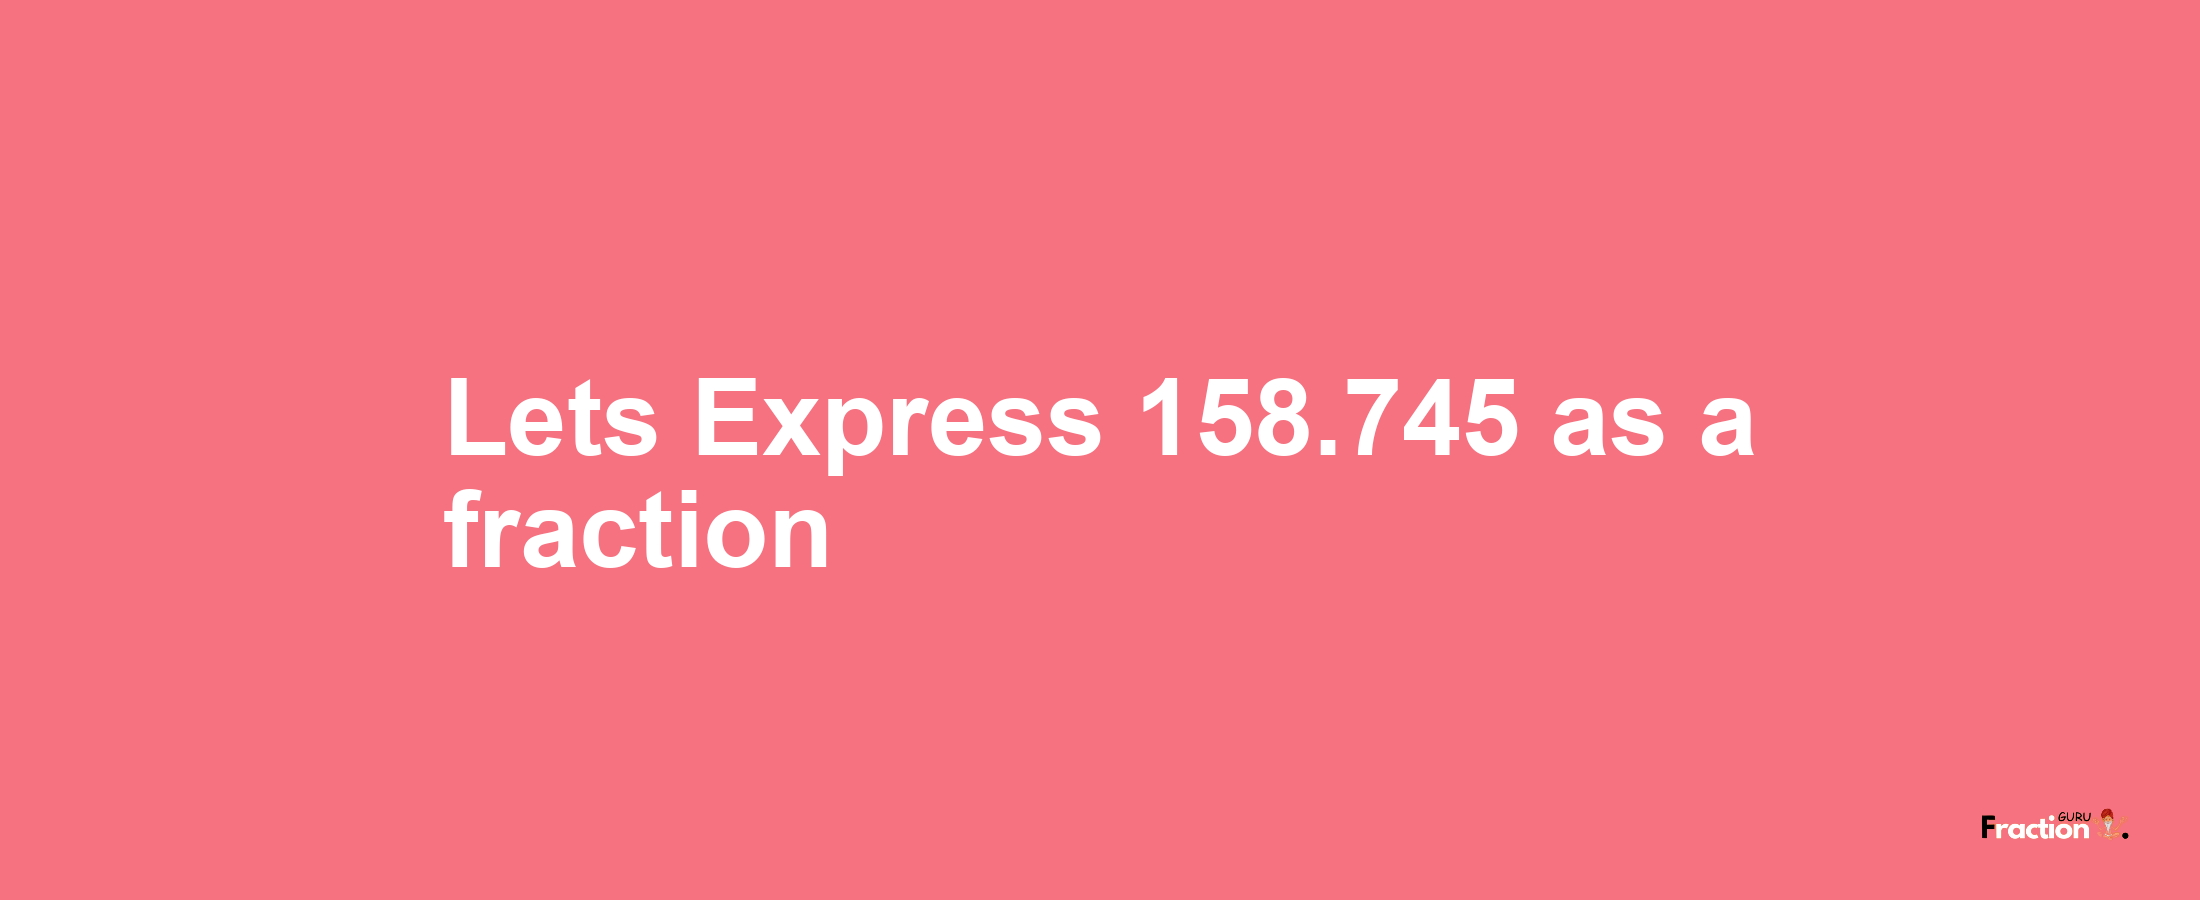 Lets Express 158.745 as afraction